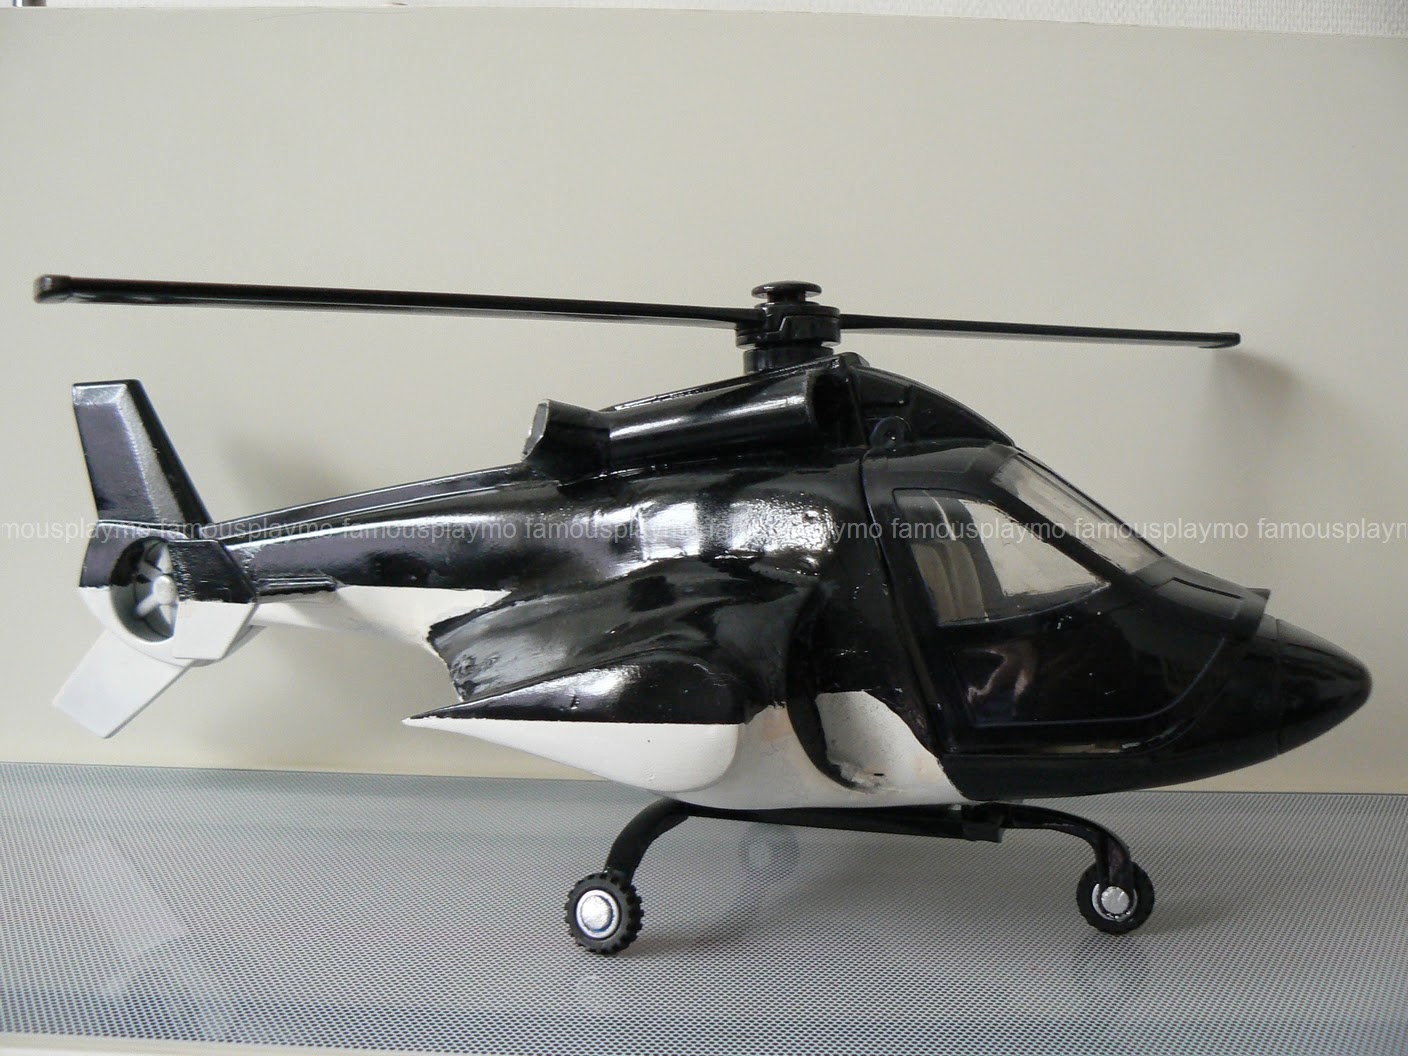 famousplaymo: Airwolf - Supercopter